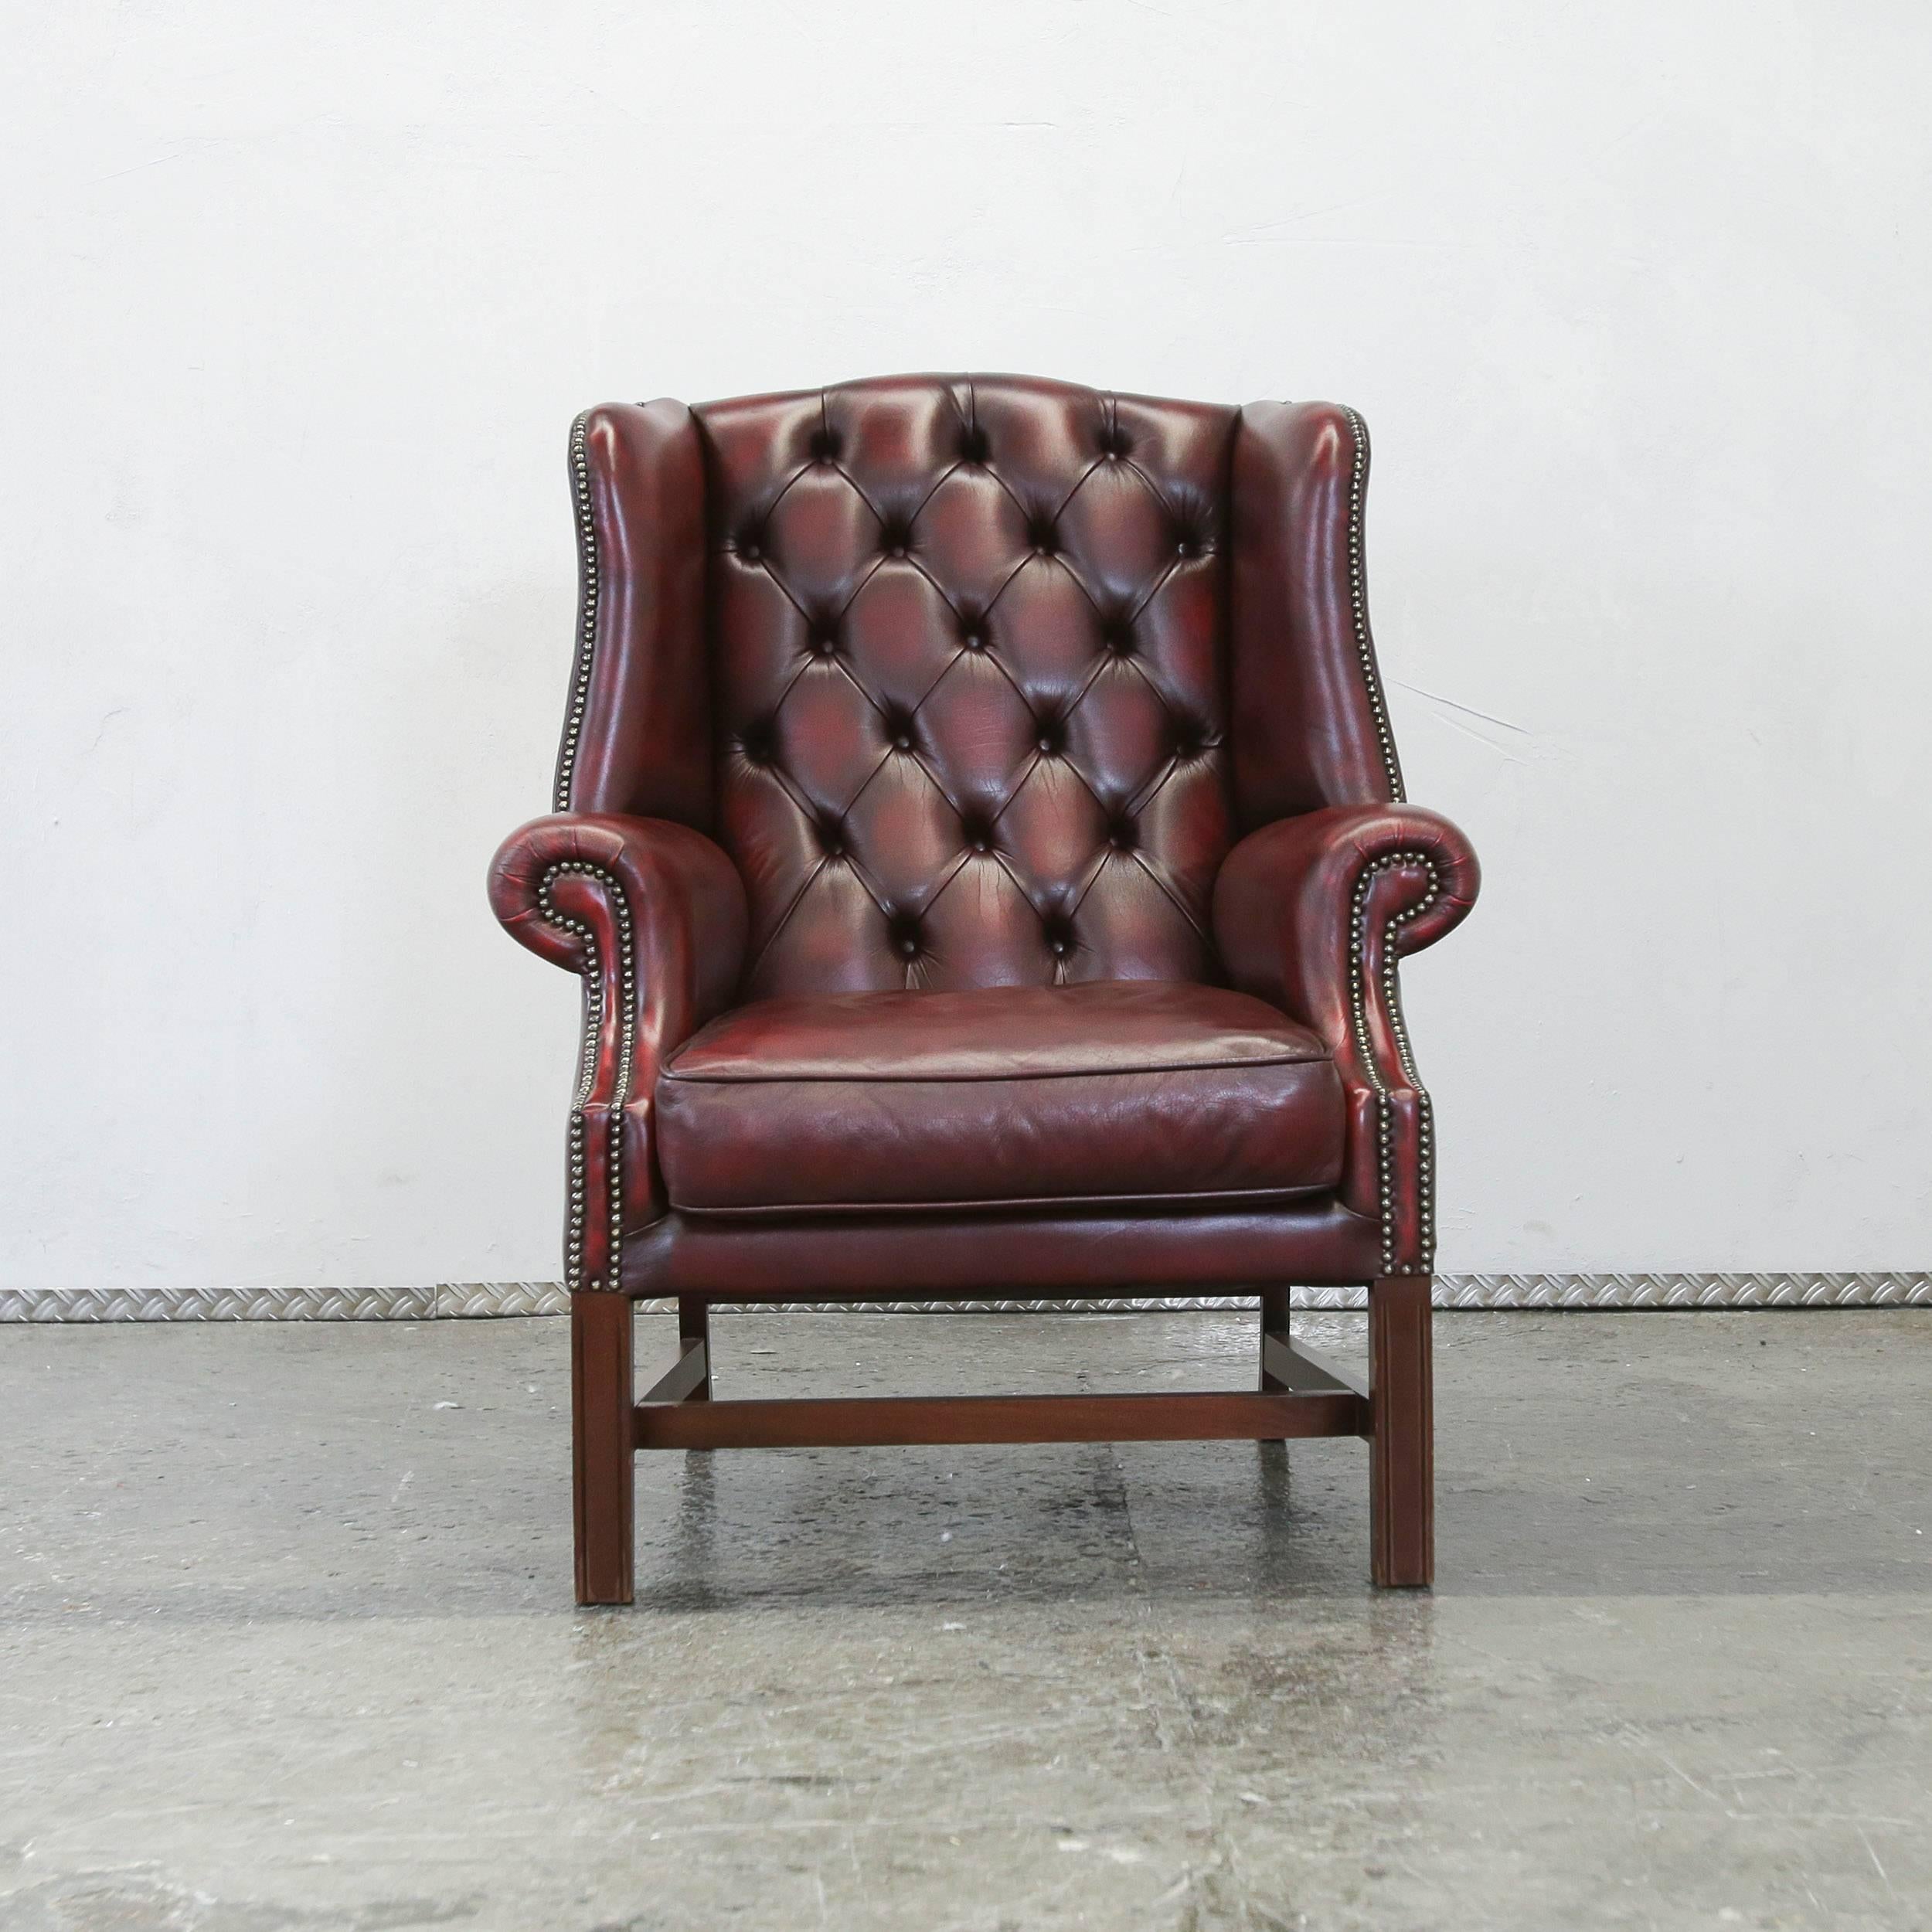 British Chesterfield Wingchair Oxblood Red Armchair One Seat Vintage Retro